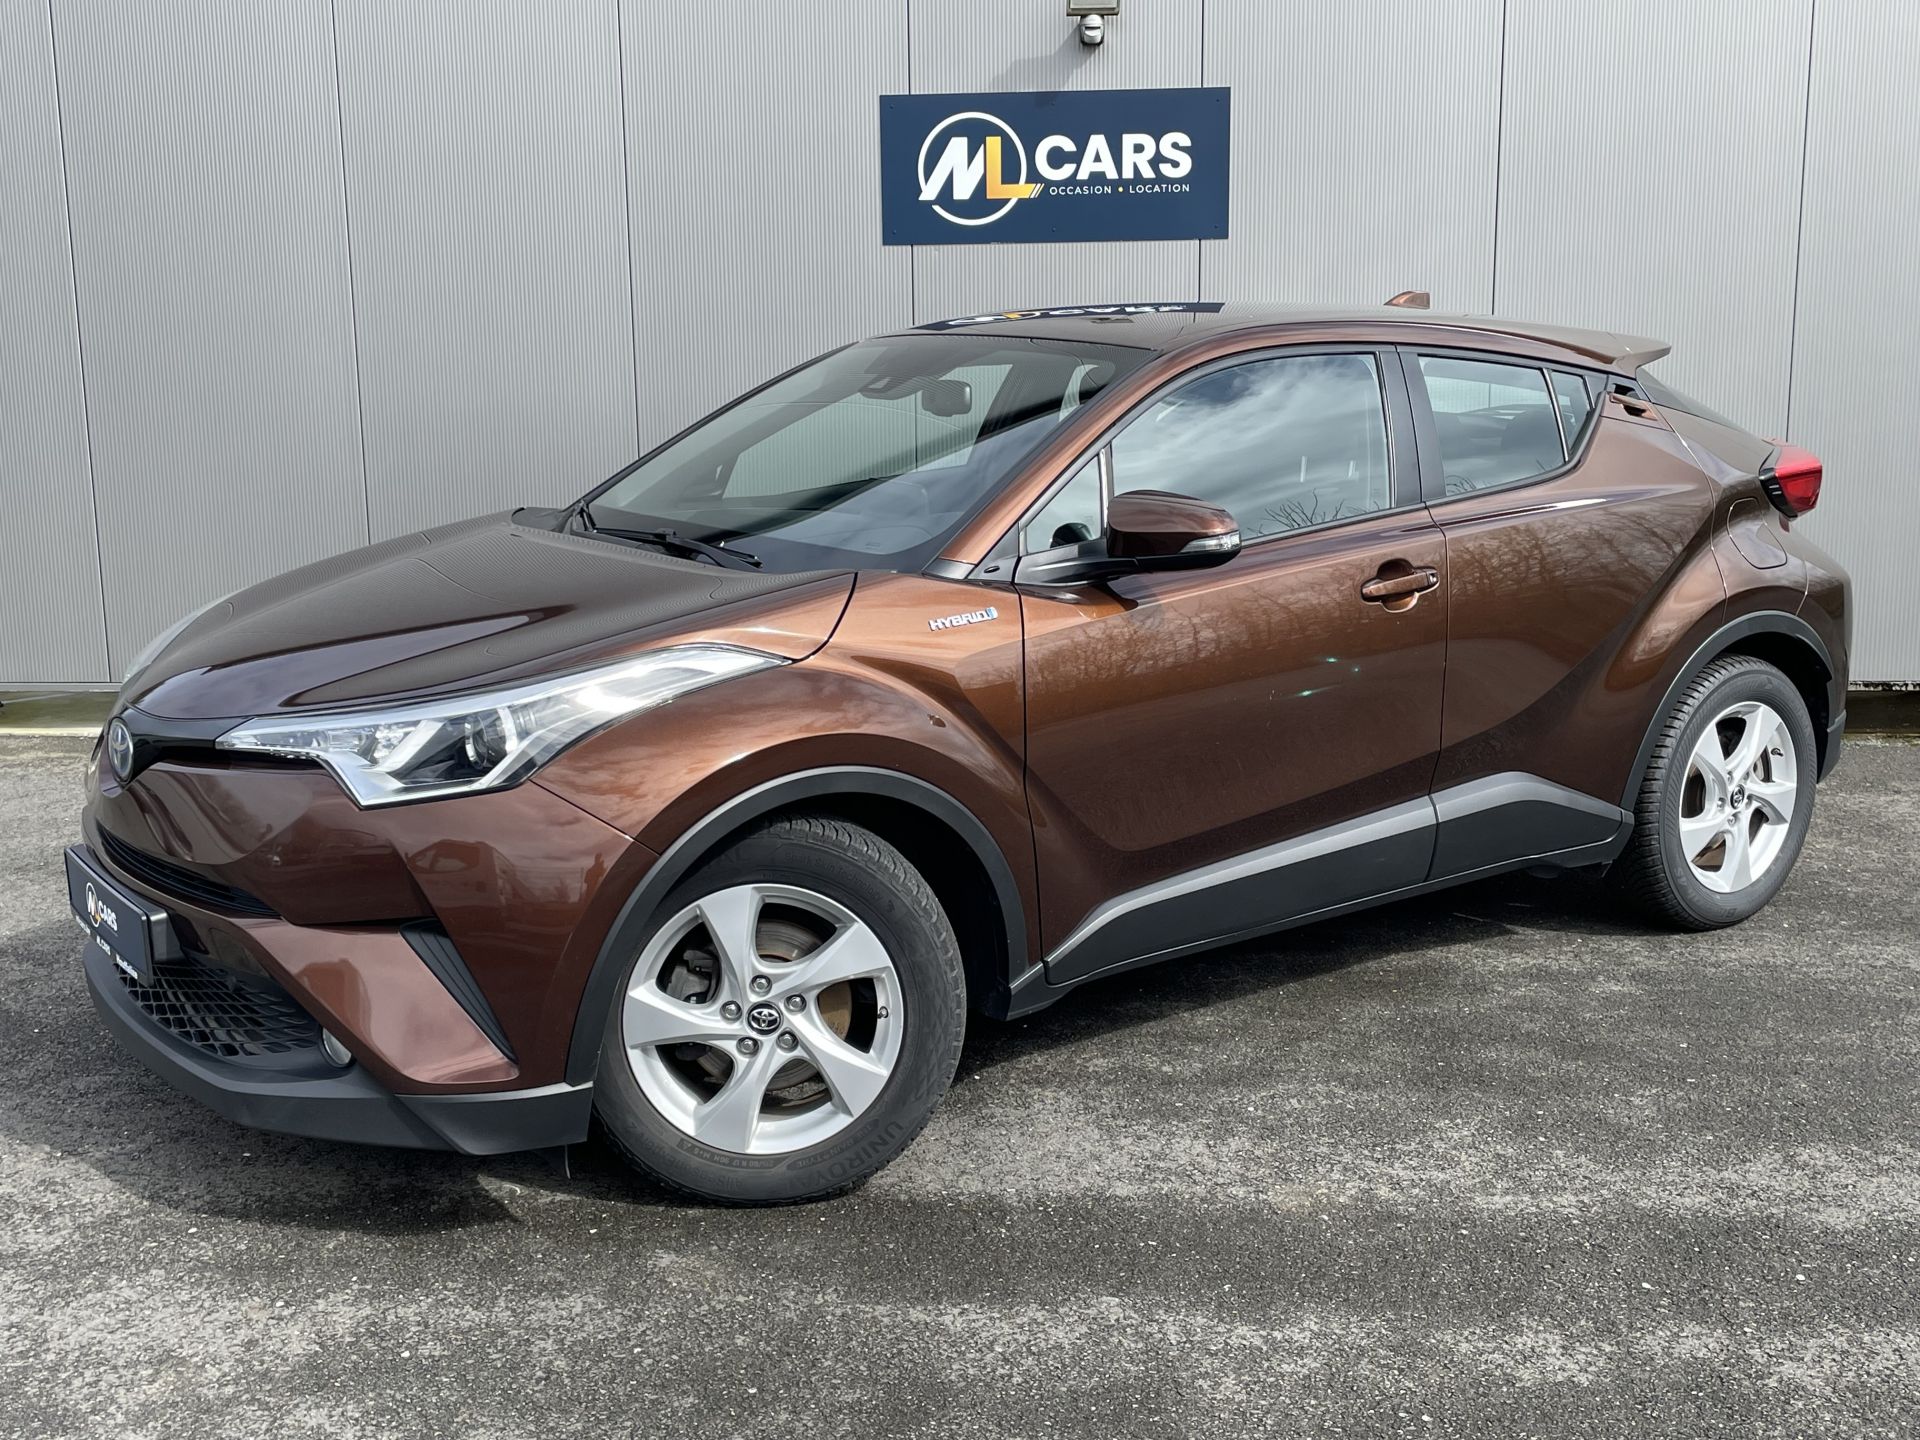 occasion TOYOTA CHR occasion  2018 5 portes - ML Cars à Houffalize